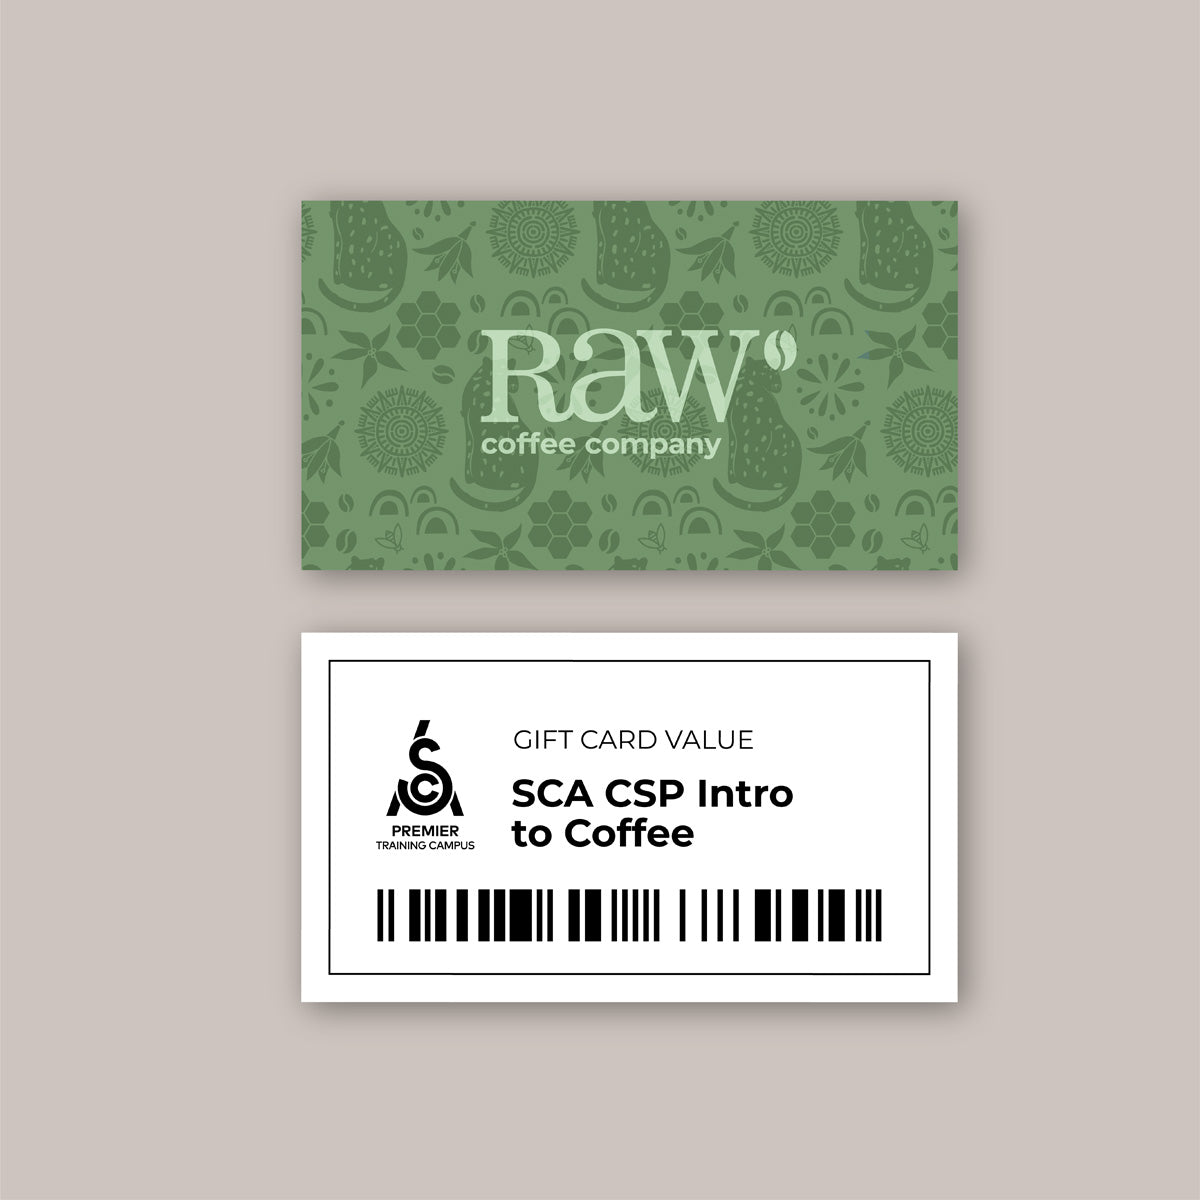 SCA-CSP-Intro-To-Coffee-Gift-Voucher_RAW-Coffee-Company